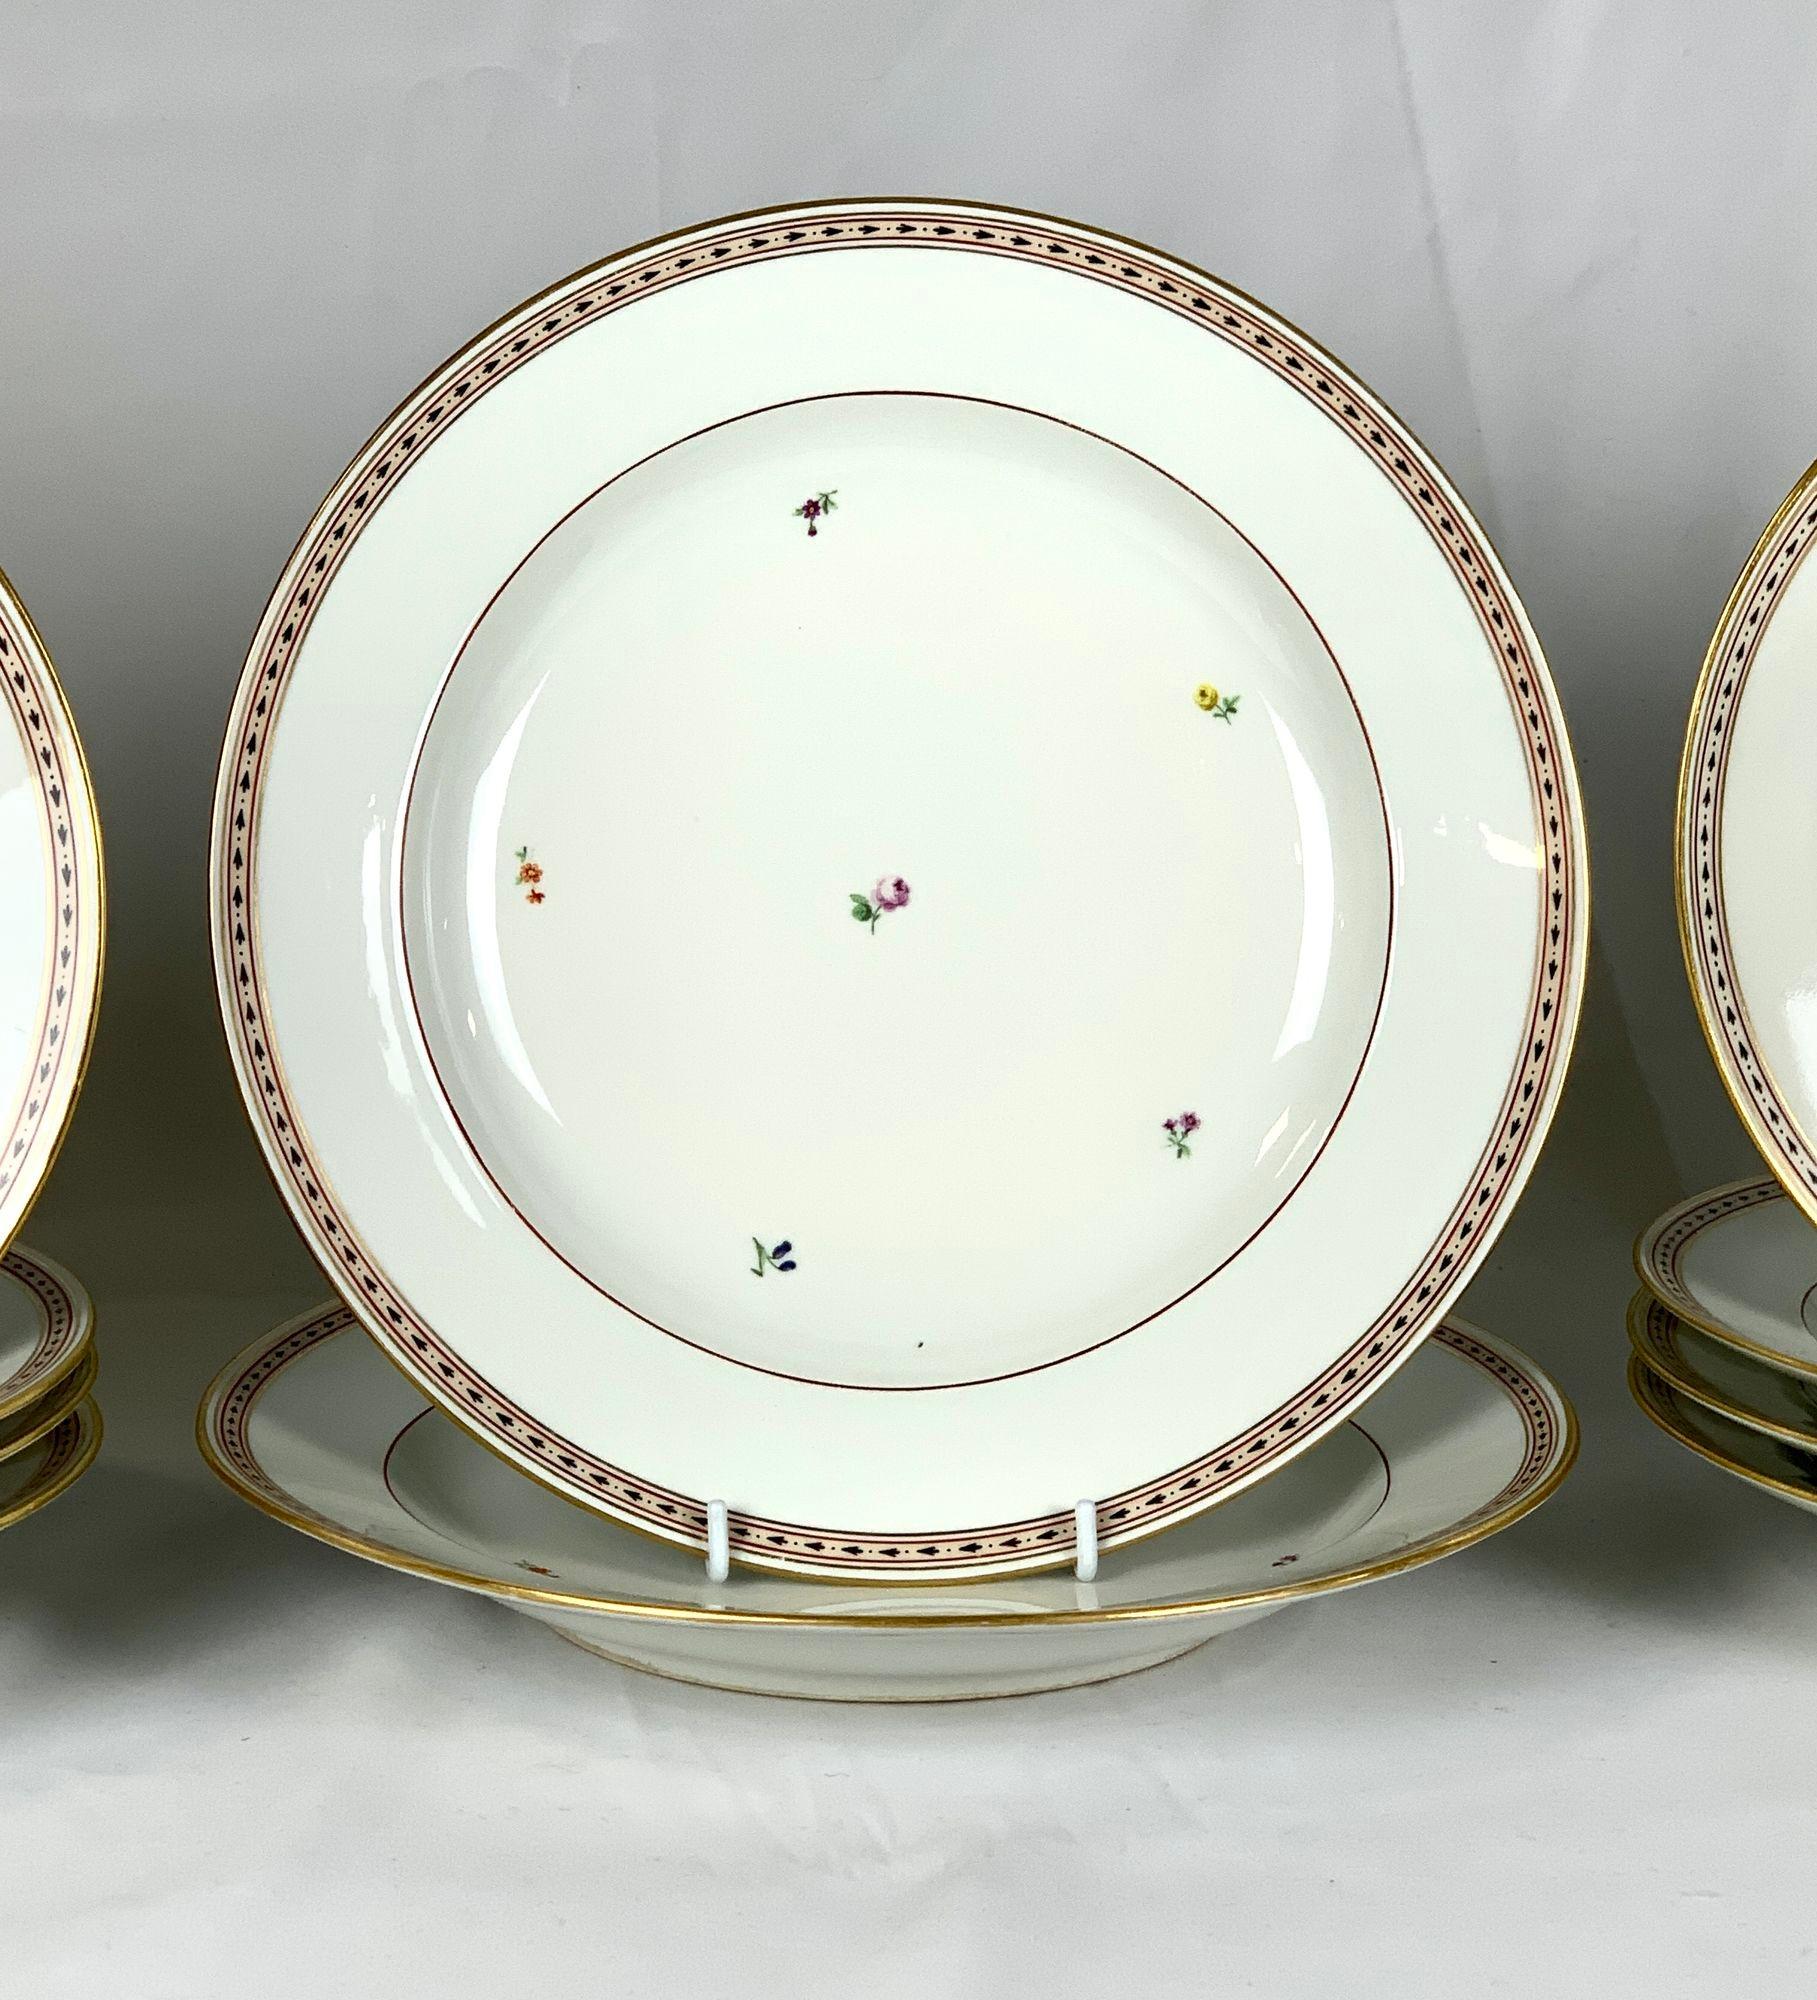 Set of 4 Dinner 4 Soup Dishes 2 Chargers 18th Century Imperial Vienna Porcelain In Excellent Condition For Sale In Katonah, NY